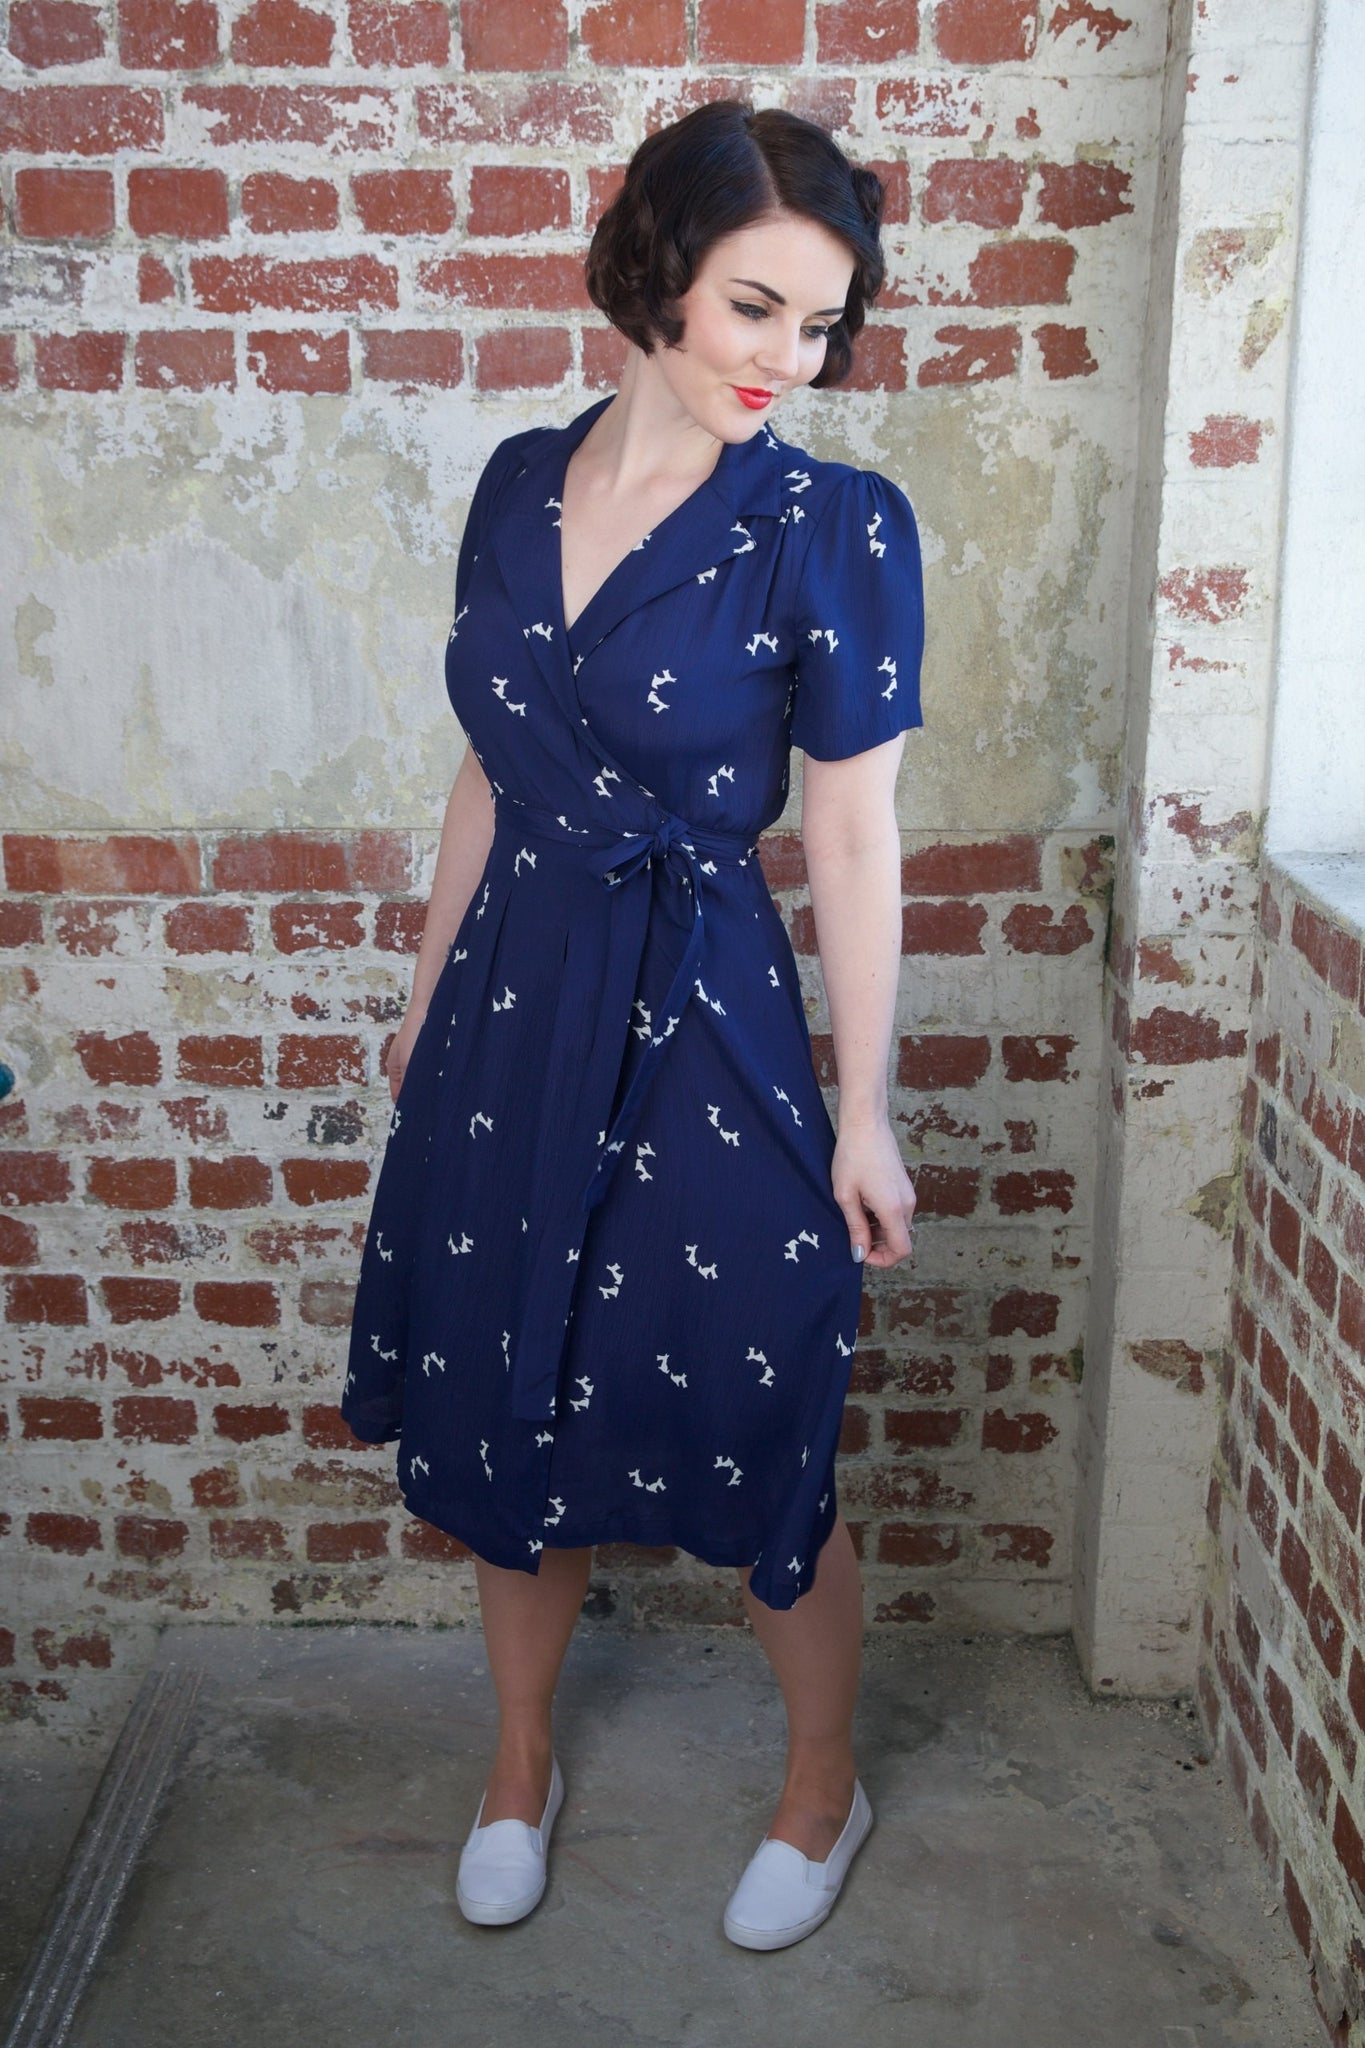 "Peggy" Wrap Dress in Navy Blue with Doggy Print Authentic 1940s Vintage Style - True and authentic vintage style clothing, inspired by the Classic styles of CC41 , WW2 and the fun 1950s RocknRoll era, for everyday wear plus events like Goodwood Revival, Twinwood Festival and Viva Las Vegas Rockabilly Weekend Rock n Romance The Seamstress of Bloomsbury